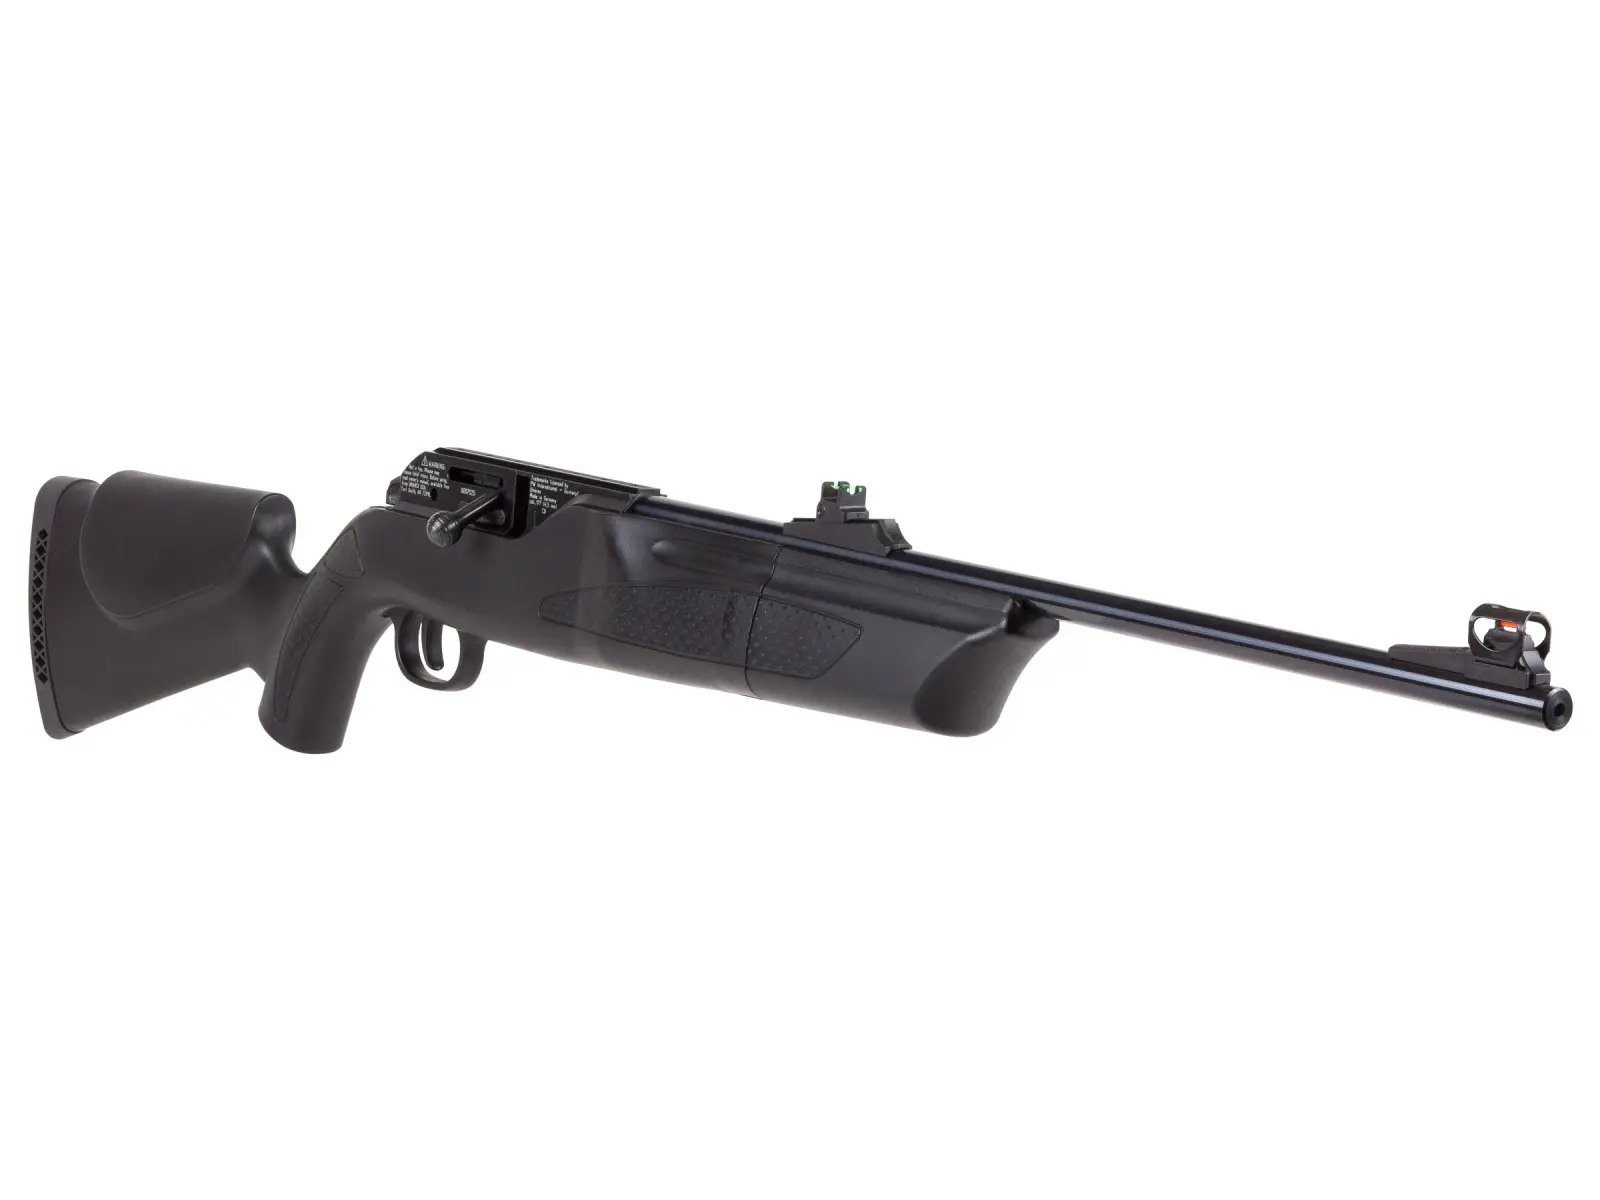 hammerli Best CO2 air rifles 2022 - Top 5 fantastic guns for the money (Reviews and Buying Guide)